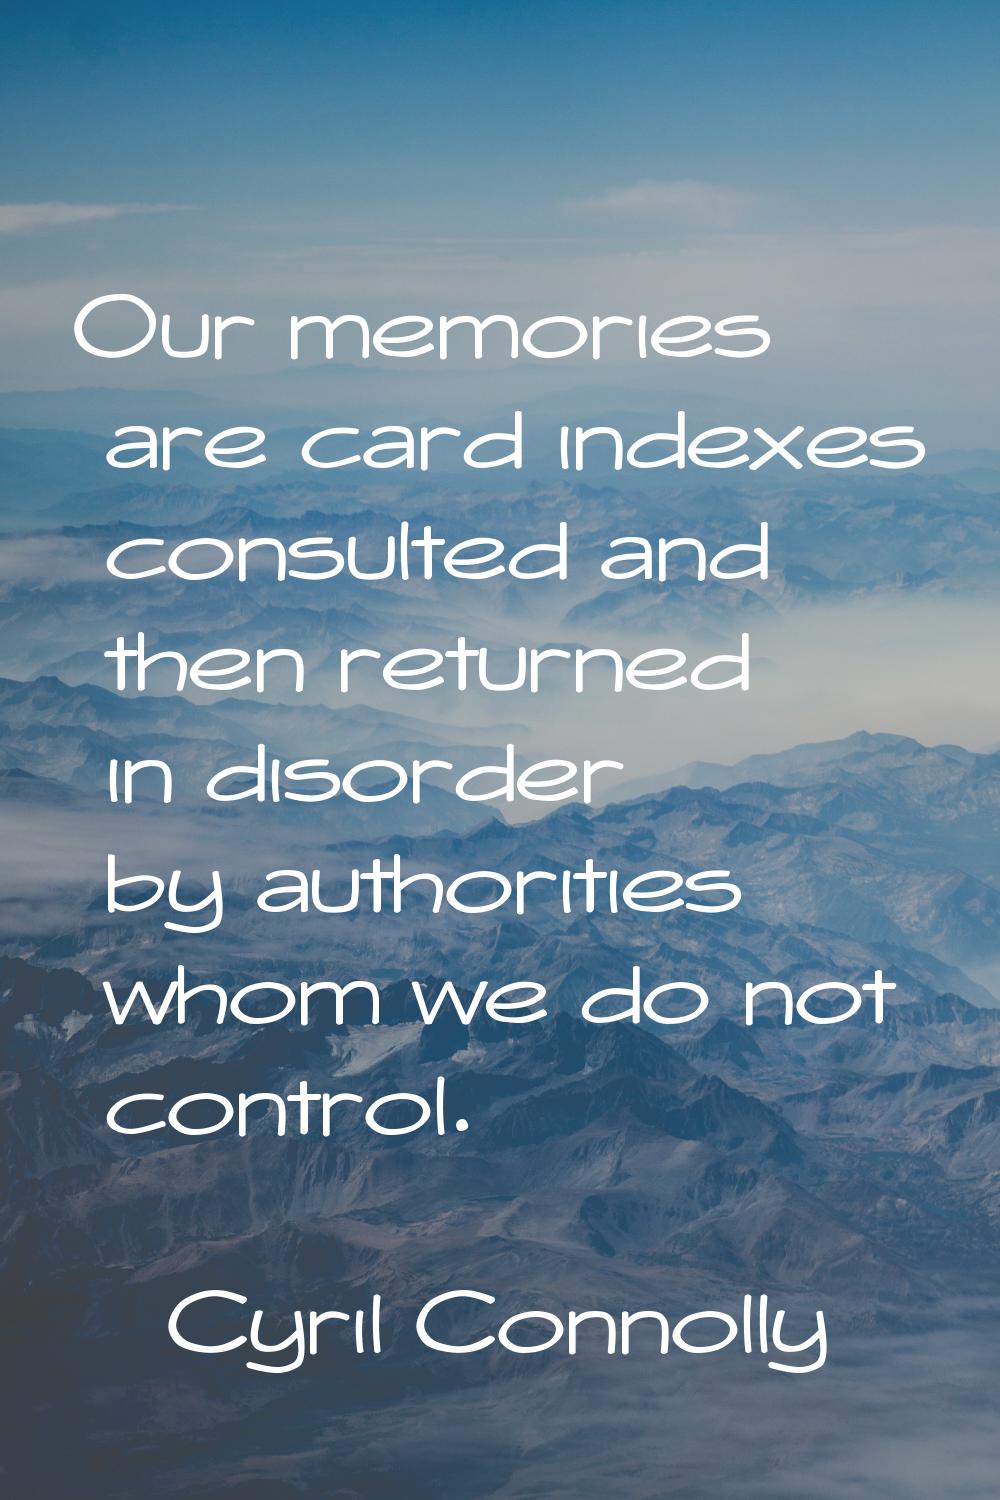 Our memories are card indexes consulted and then returned in disorder by authorities whom we do not